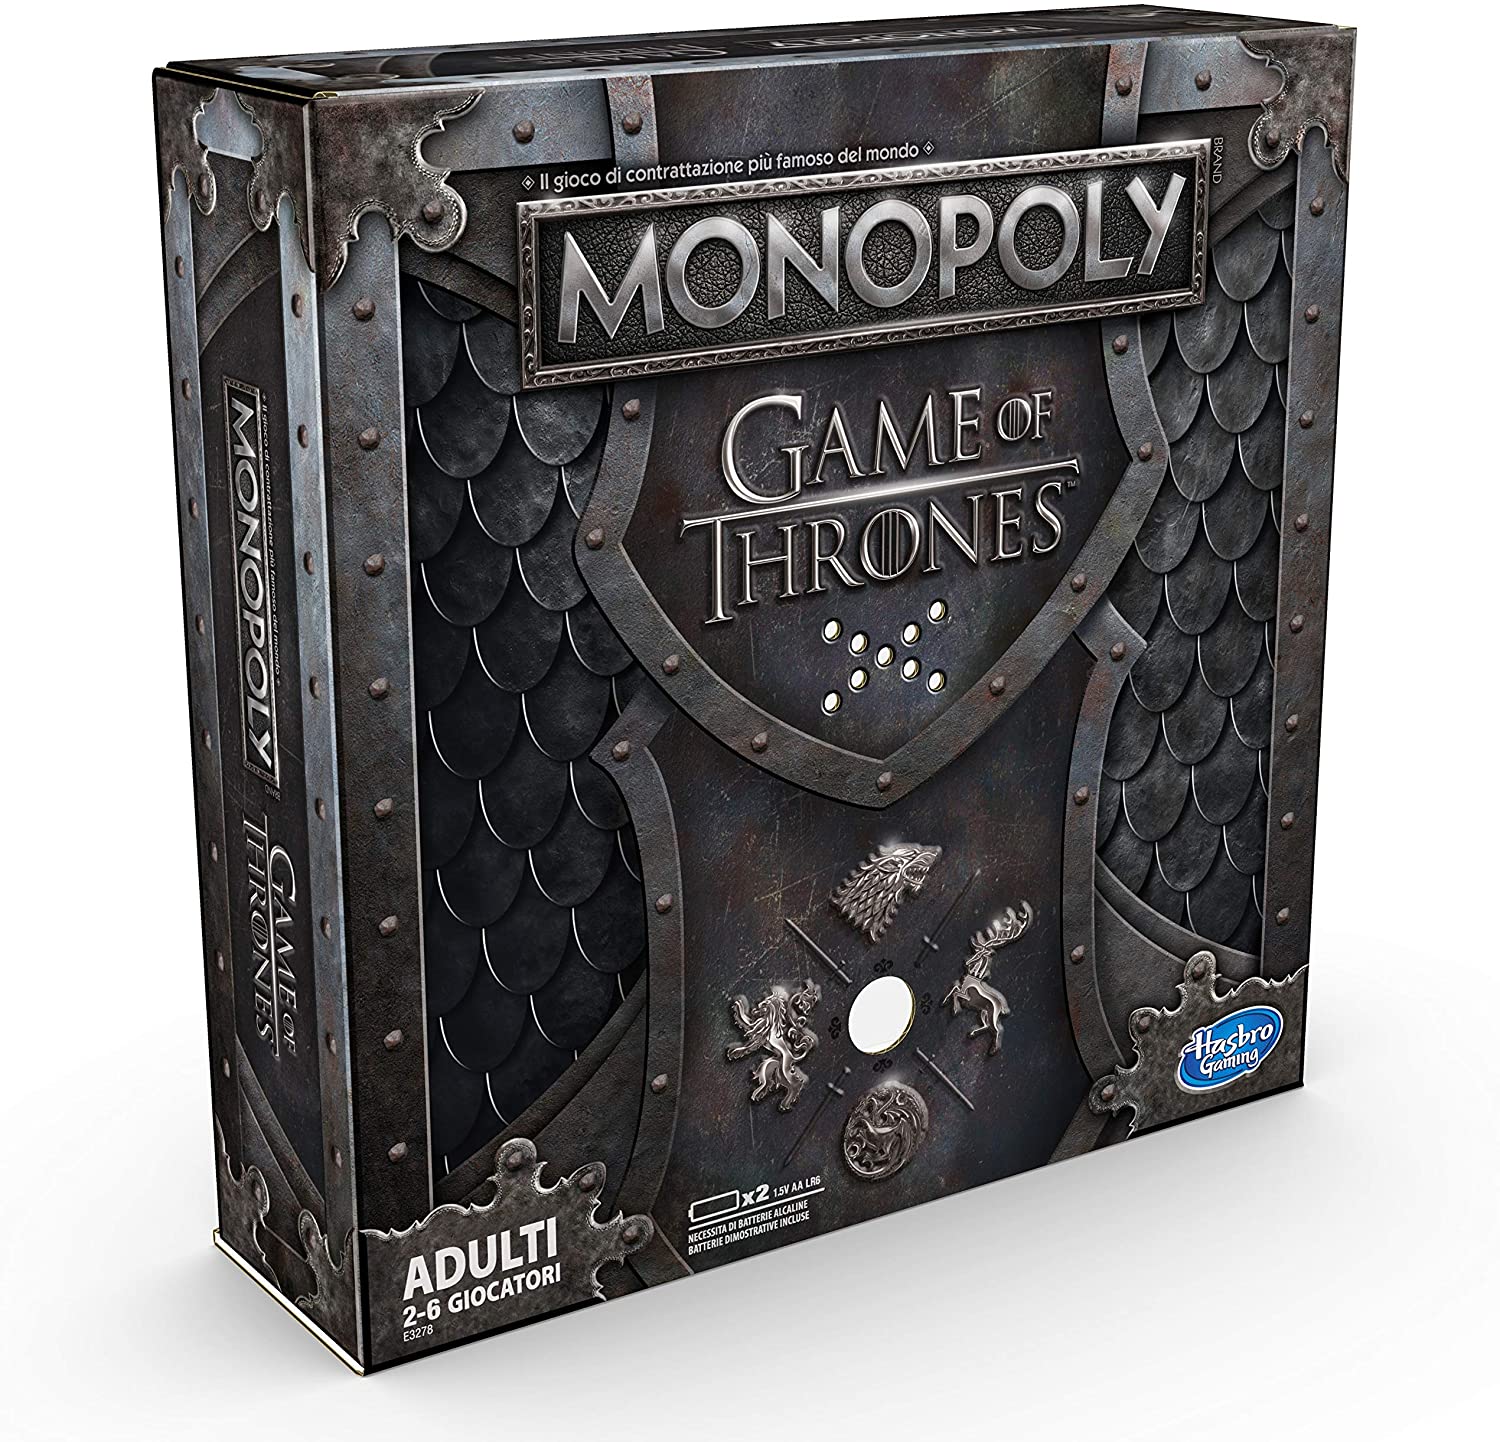 Monopoly di Game of Thrones - neomag.